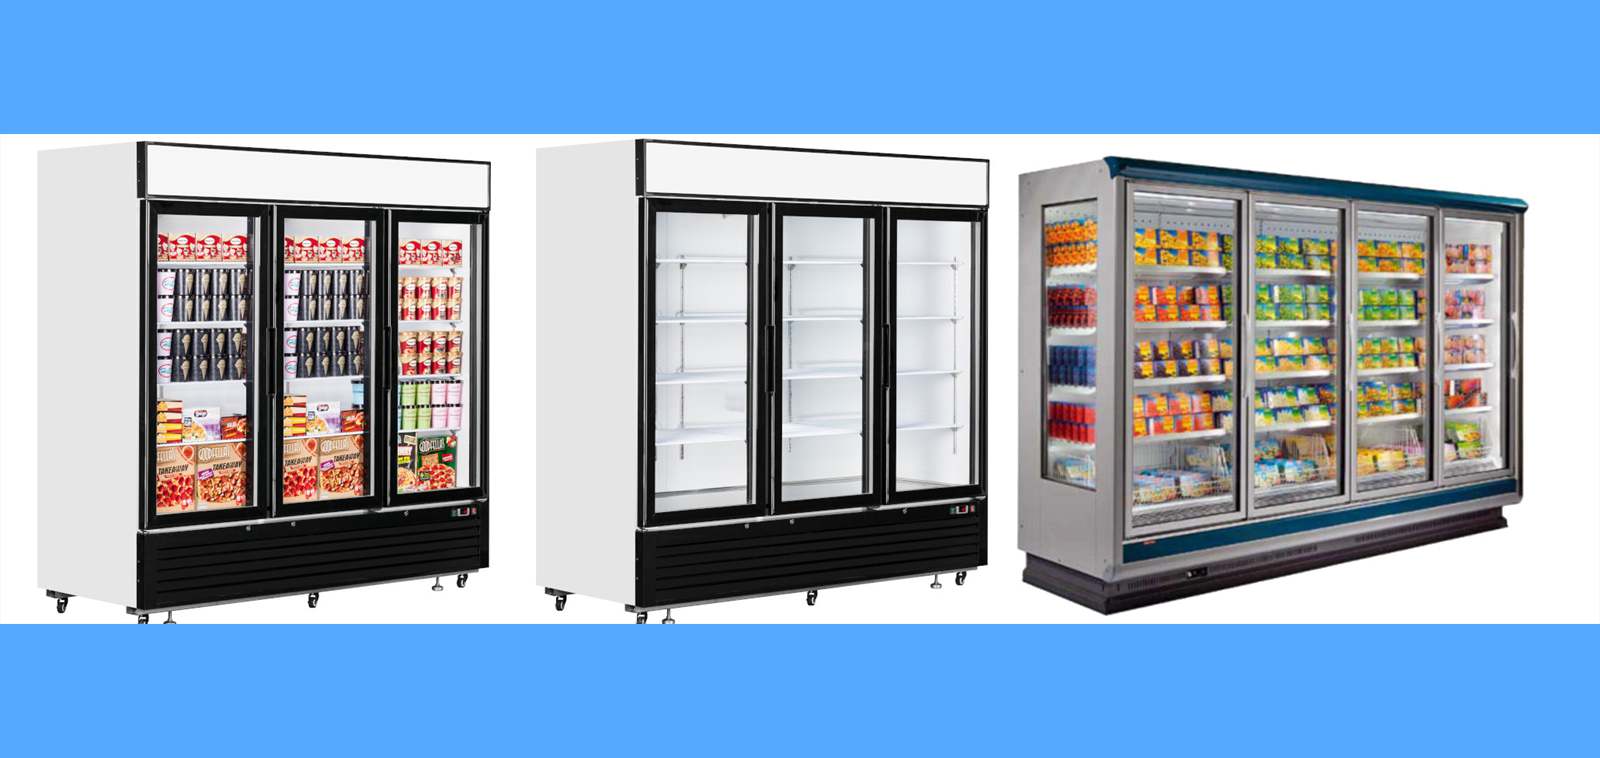 We sell commercial fridges and freezers